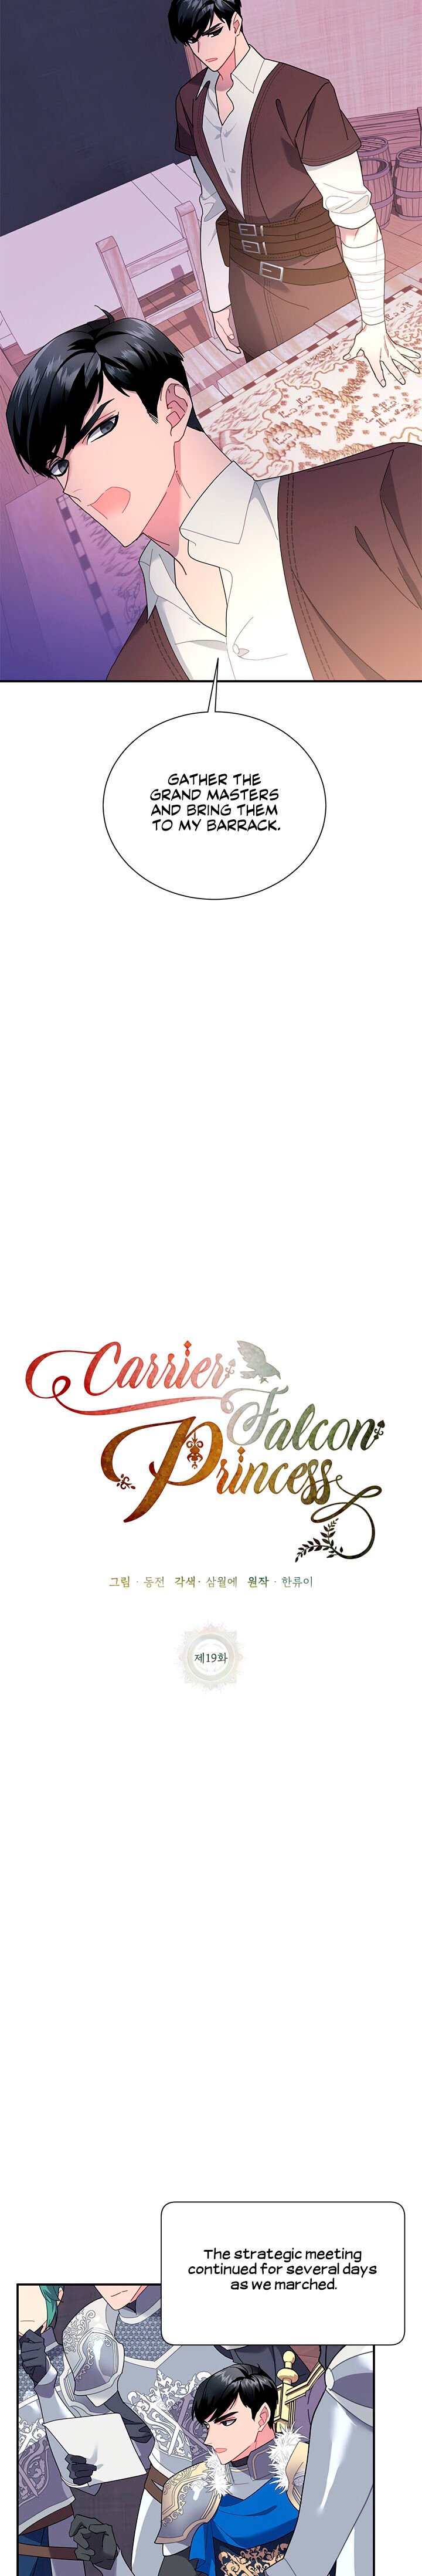 Cavier Falcon Princess Chapter 19 - Page 9